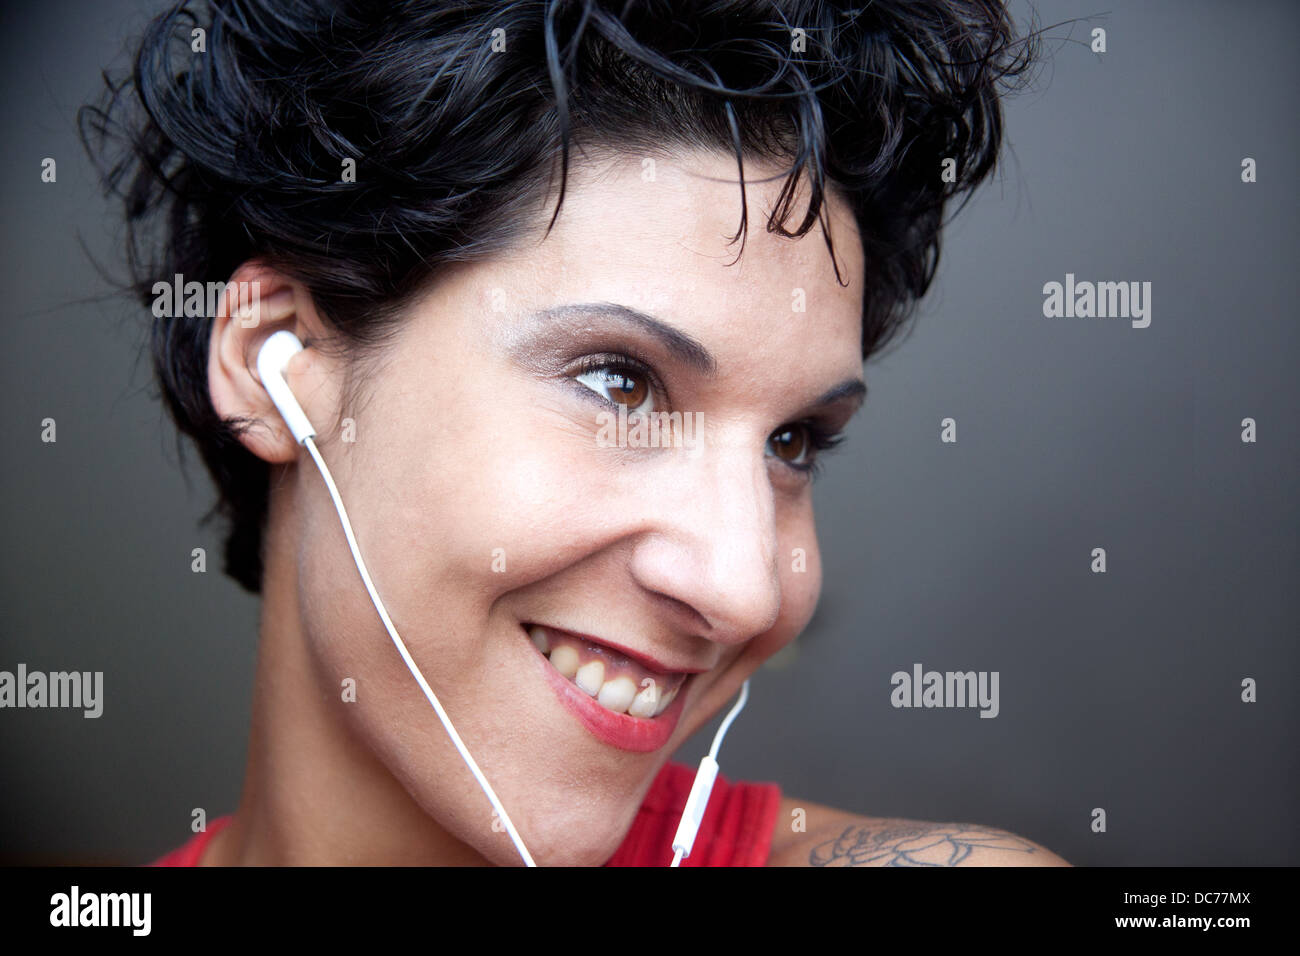 woman listening music with earphone Stock Photo